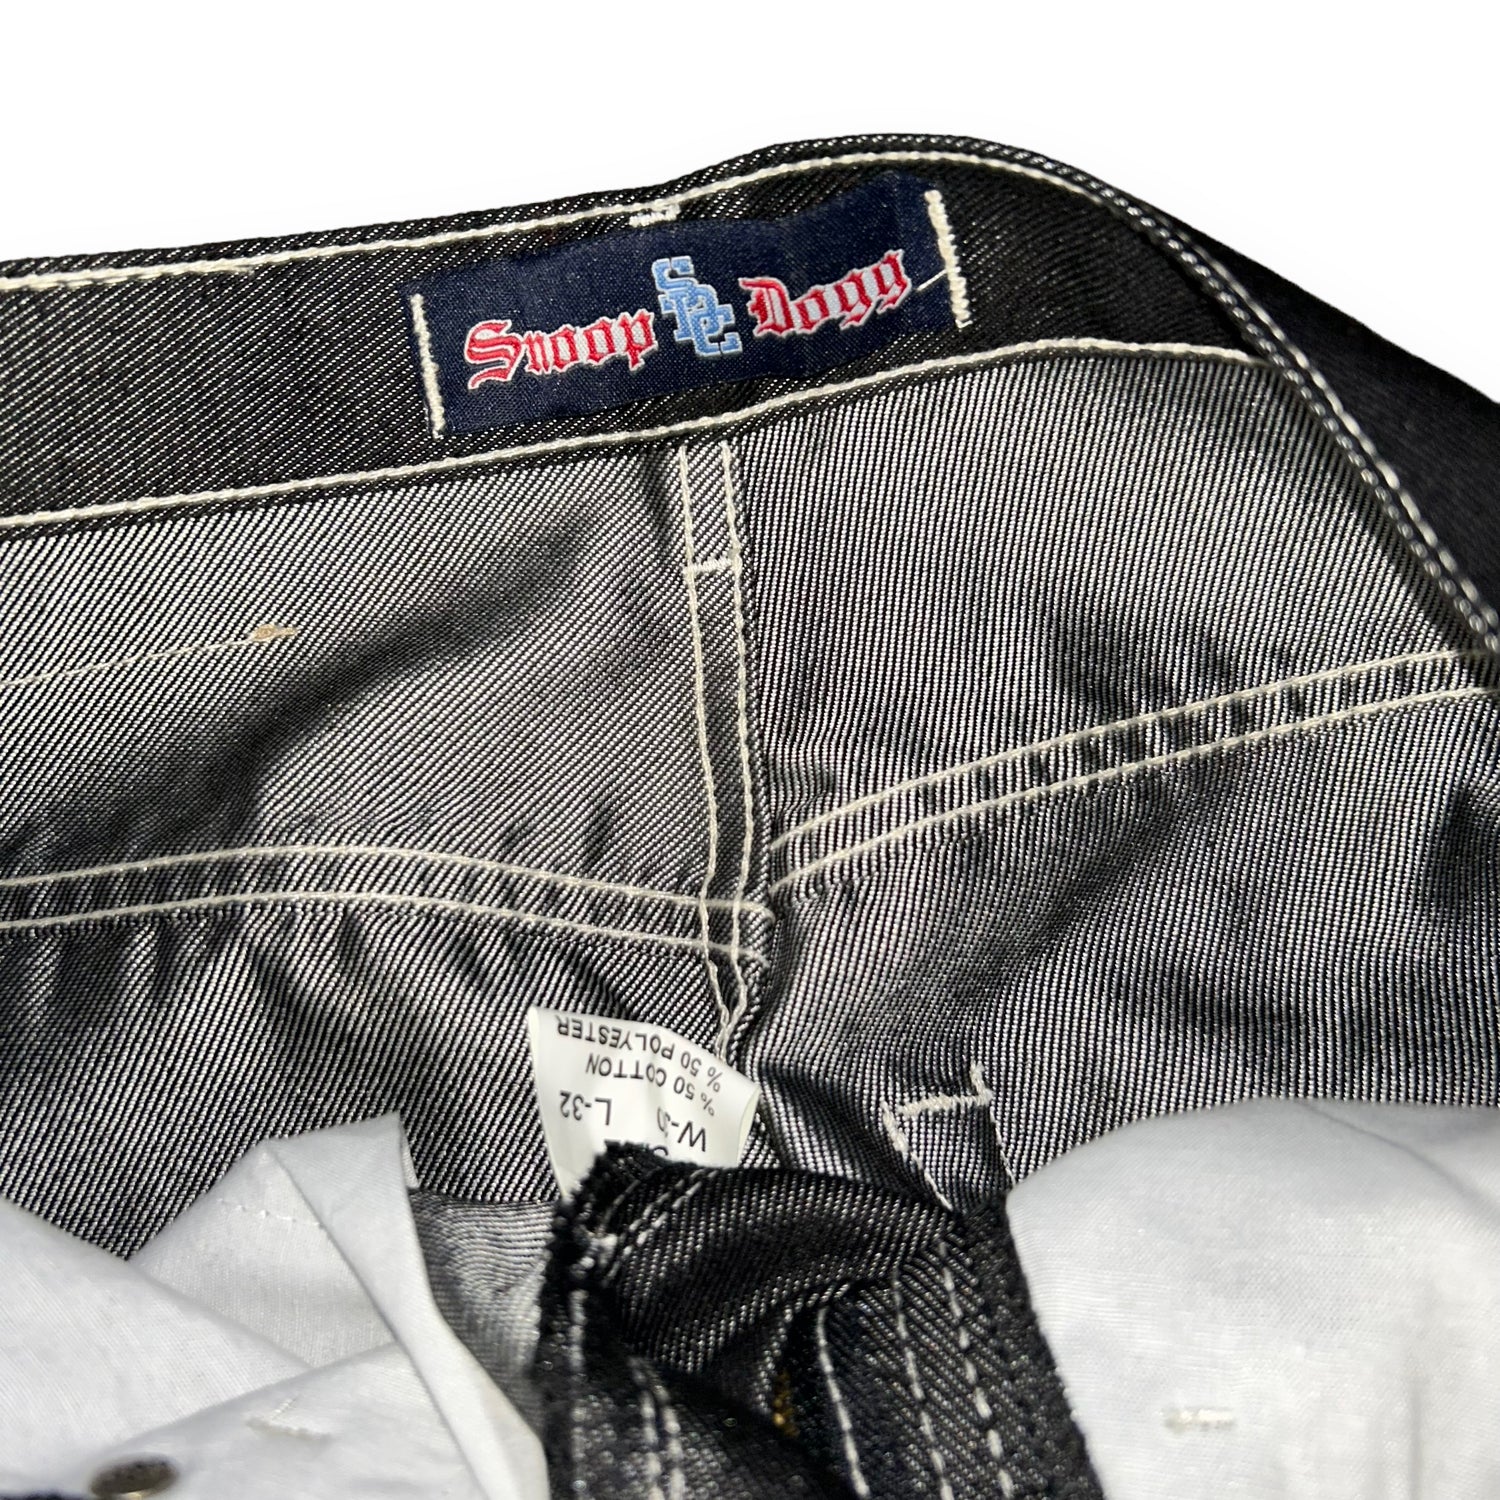 Baggy Jeans Snoop Dogg Clothing Shiny Vintage (30 US S)